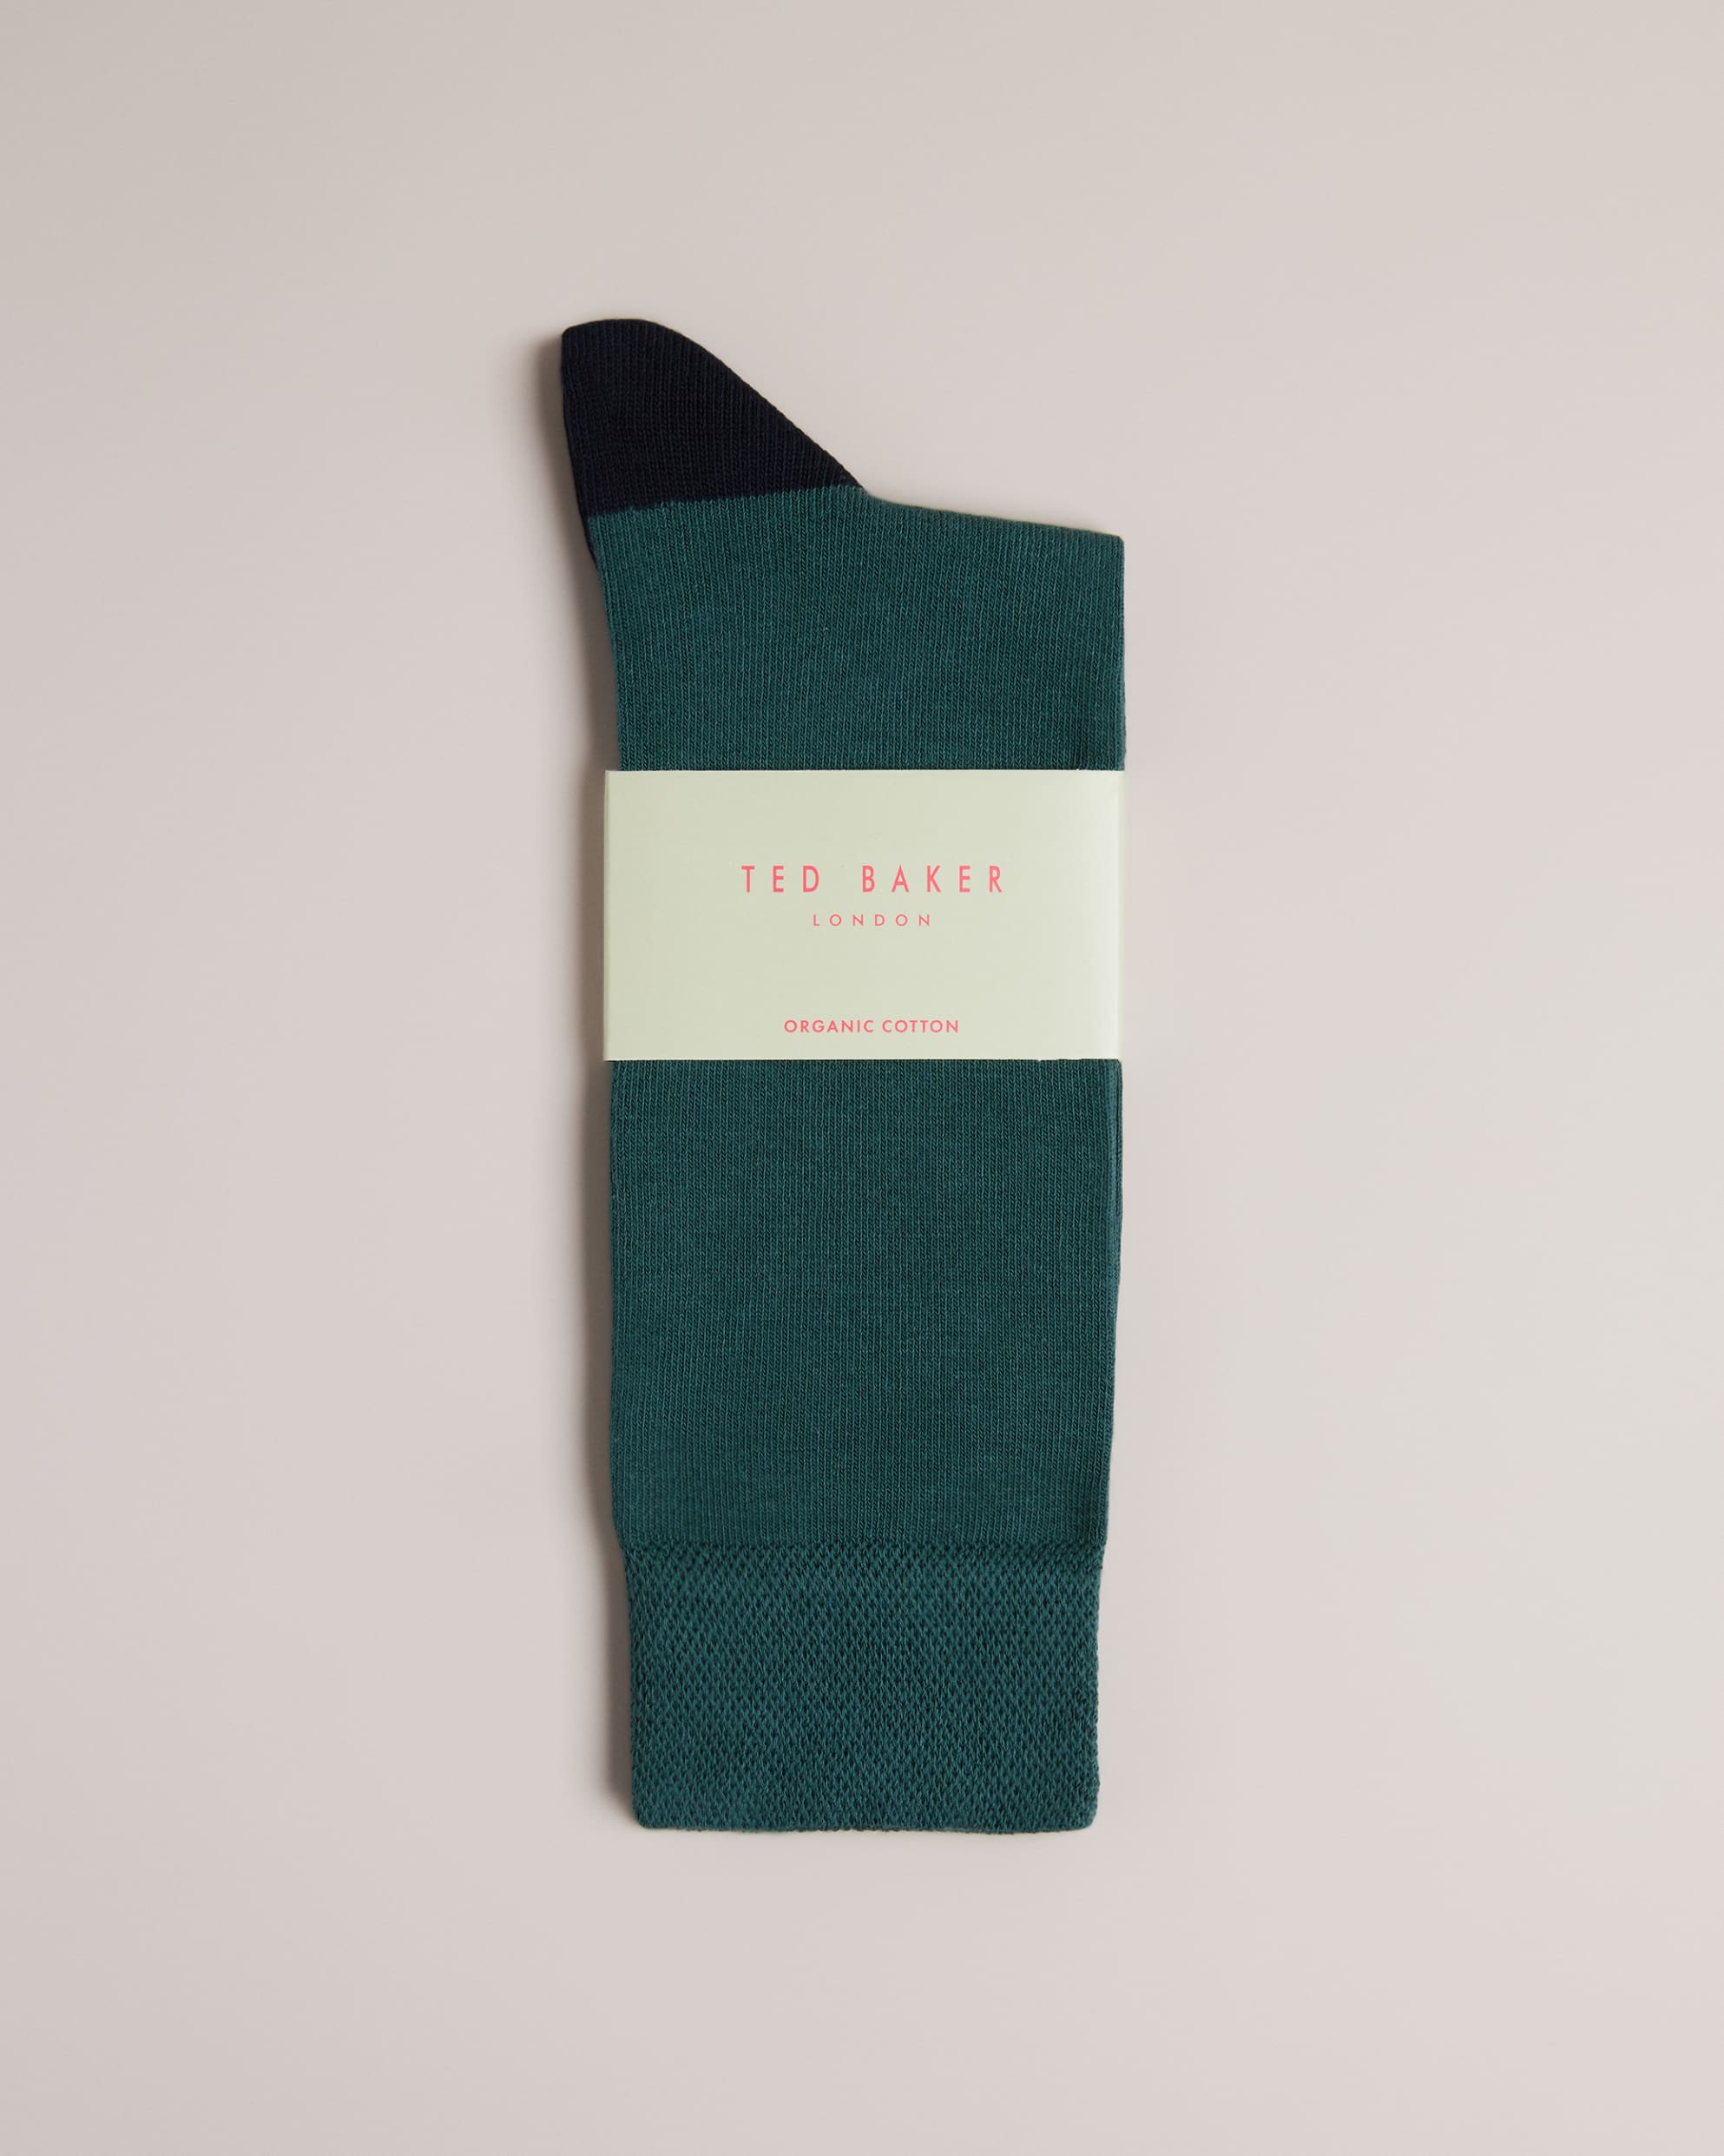 Patterned Sock – Ted Baker, Canada